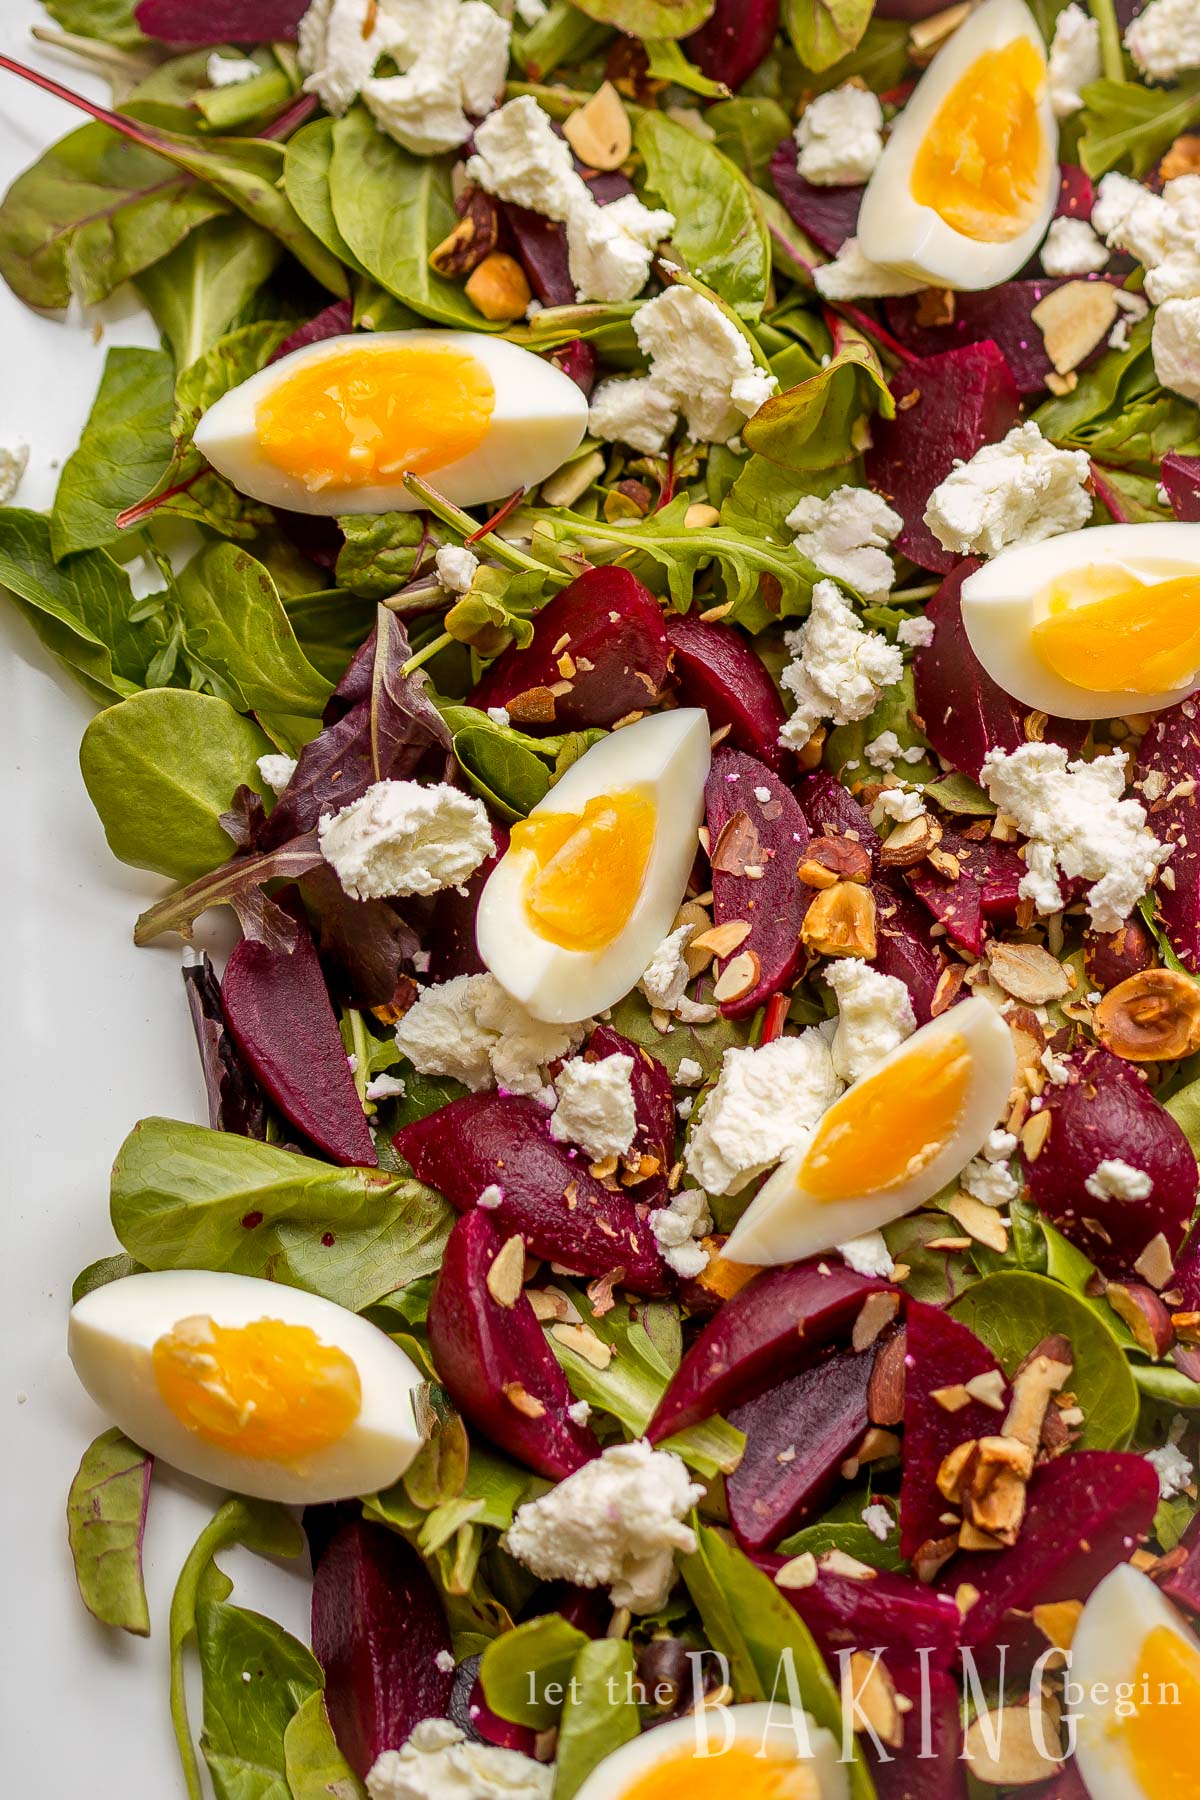 Beet and Goat Cheese Salad with Egg is served on a bed of Spring Mix Salad, then sprinkled with Goat Cheese, Hazelnuts and Egg on a platter.